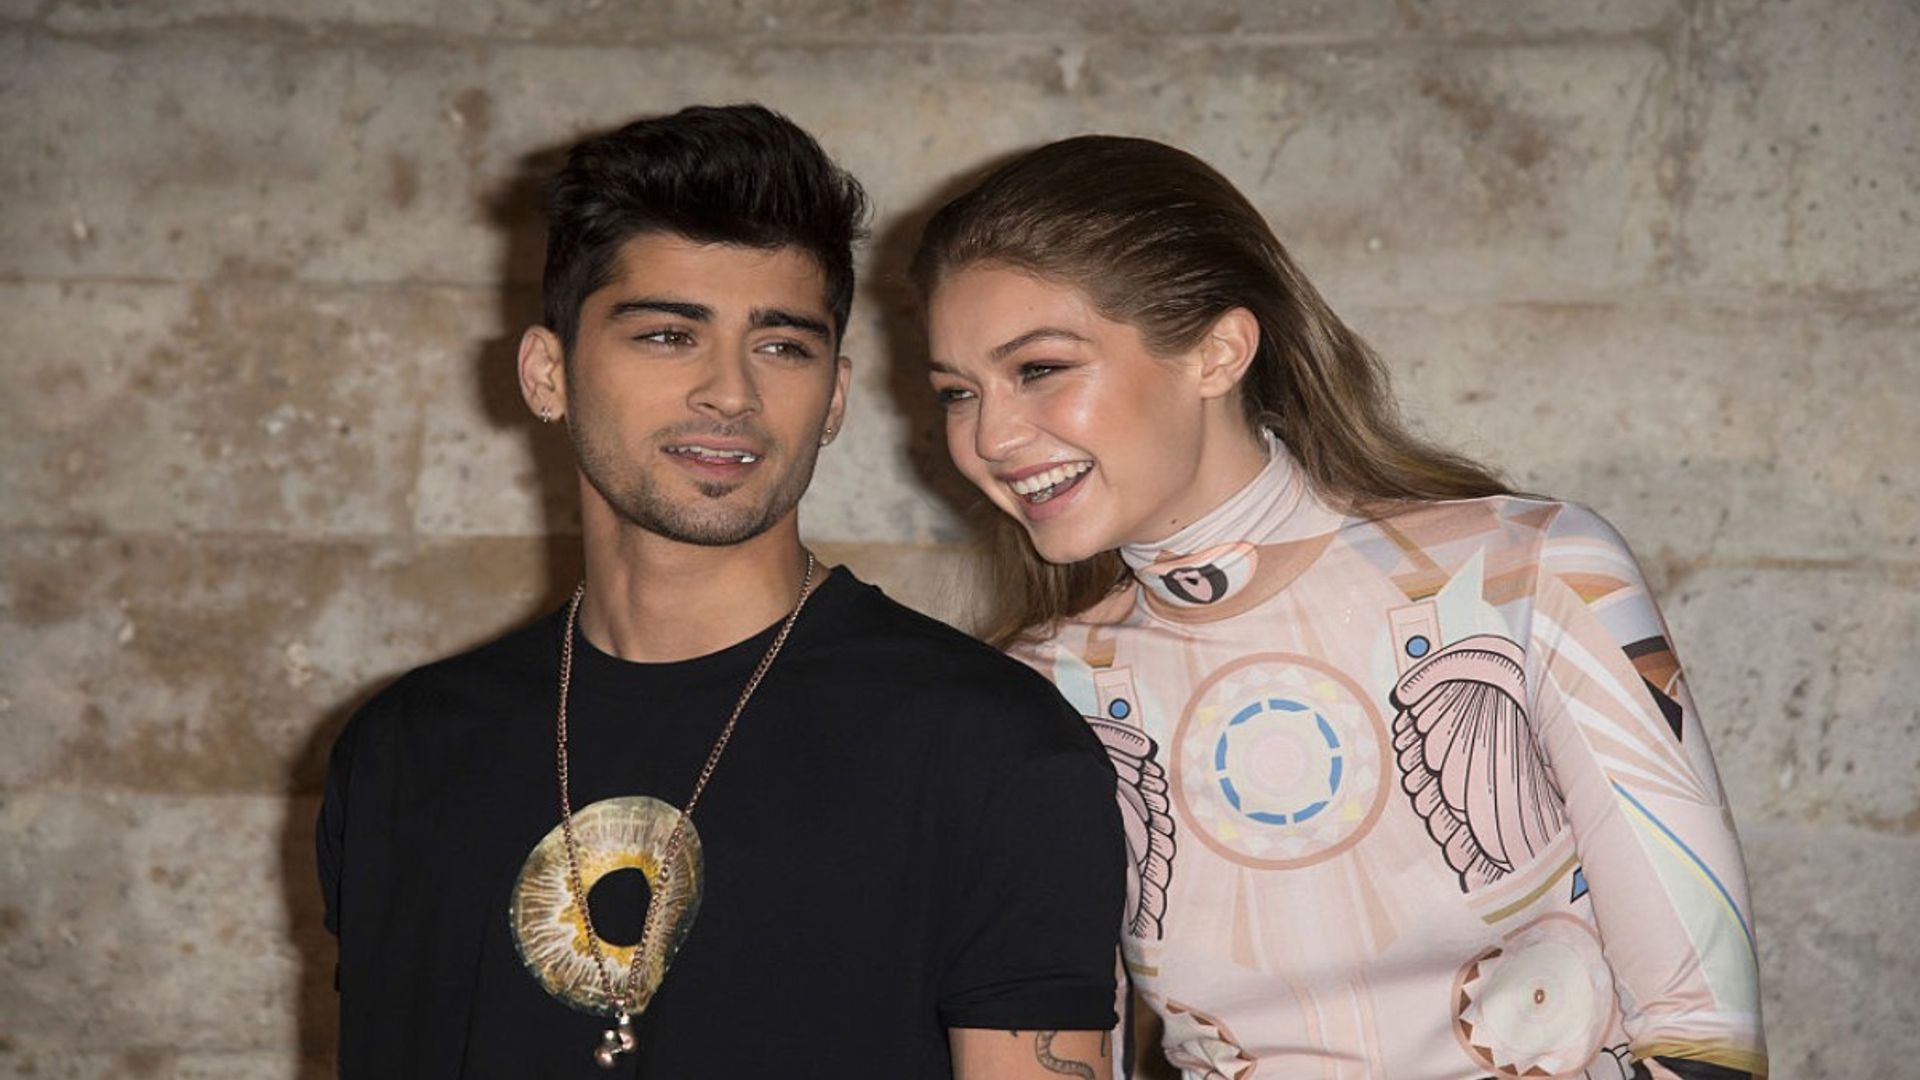 Gigi Hadid’s baby photo is the cutest ever - see it here